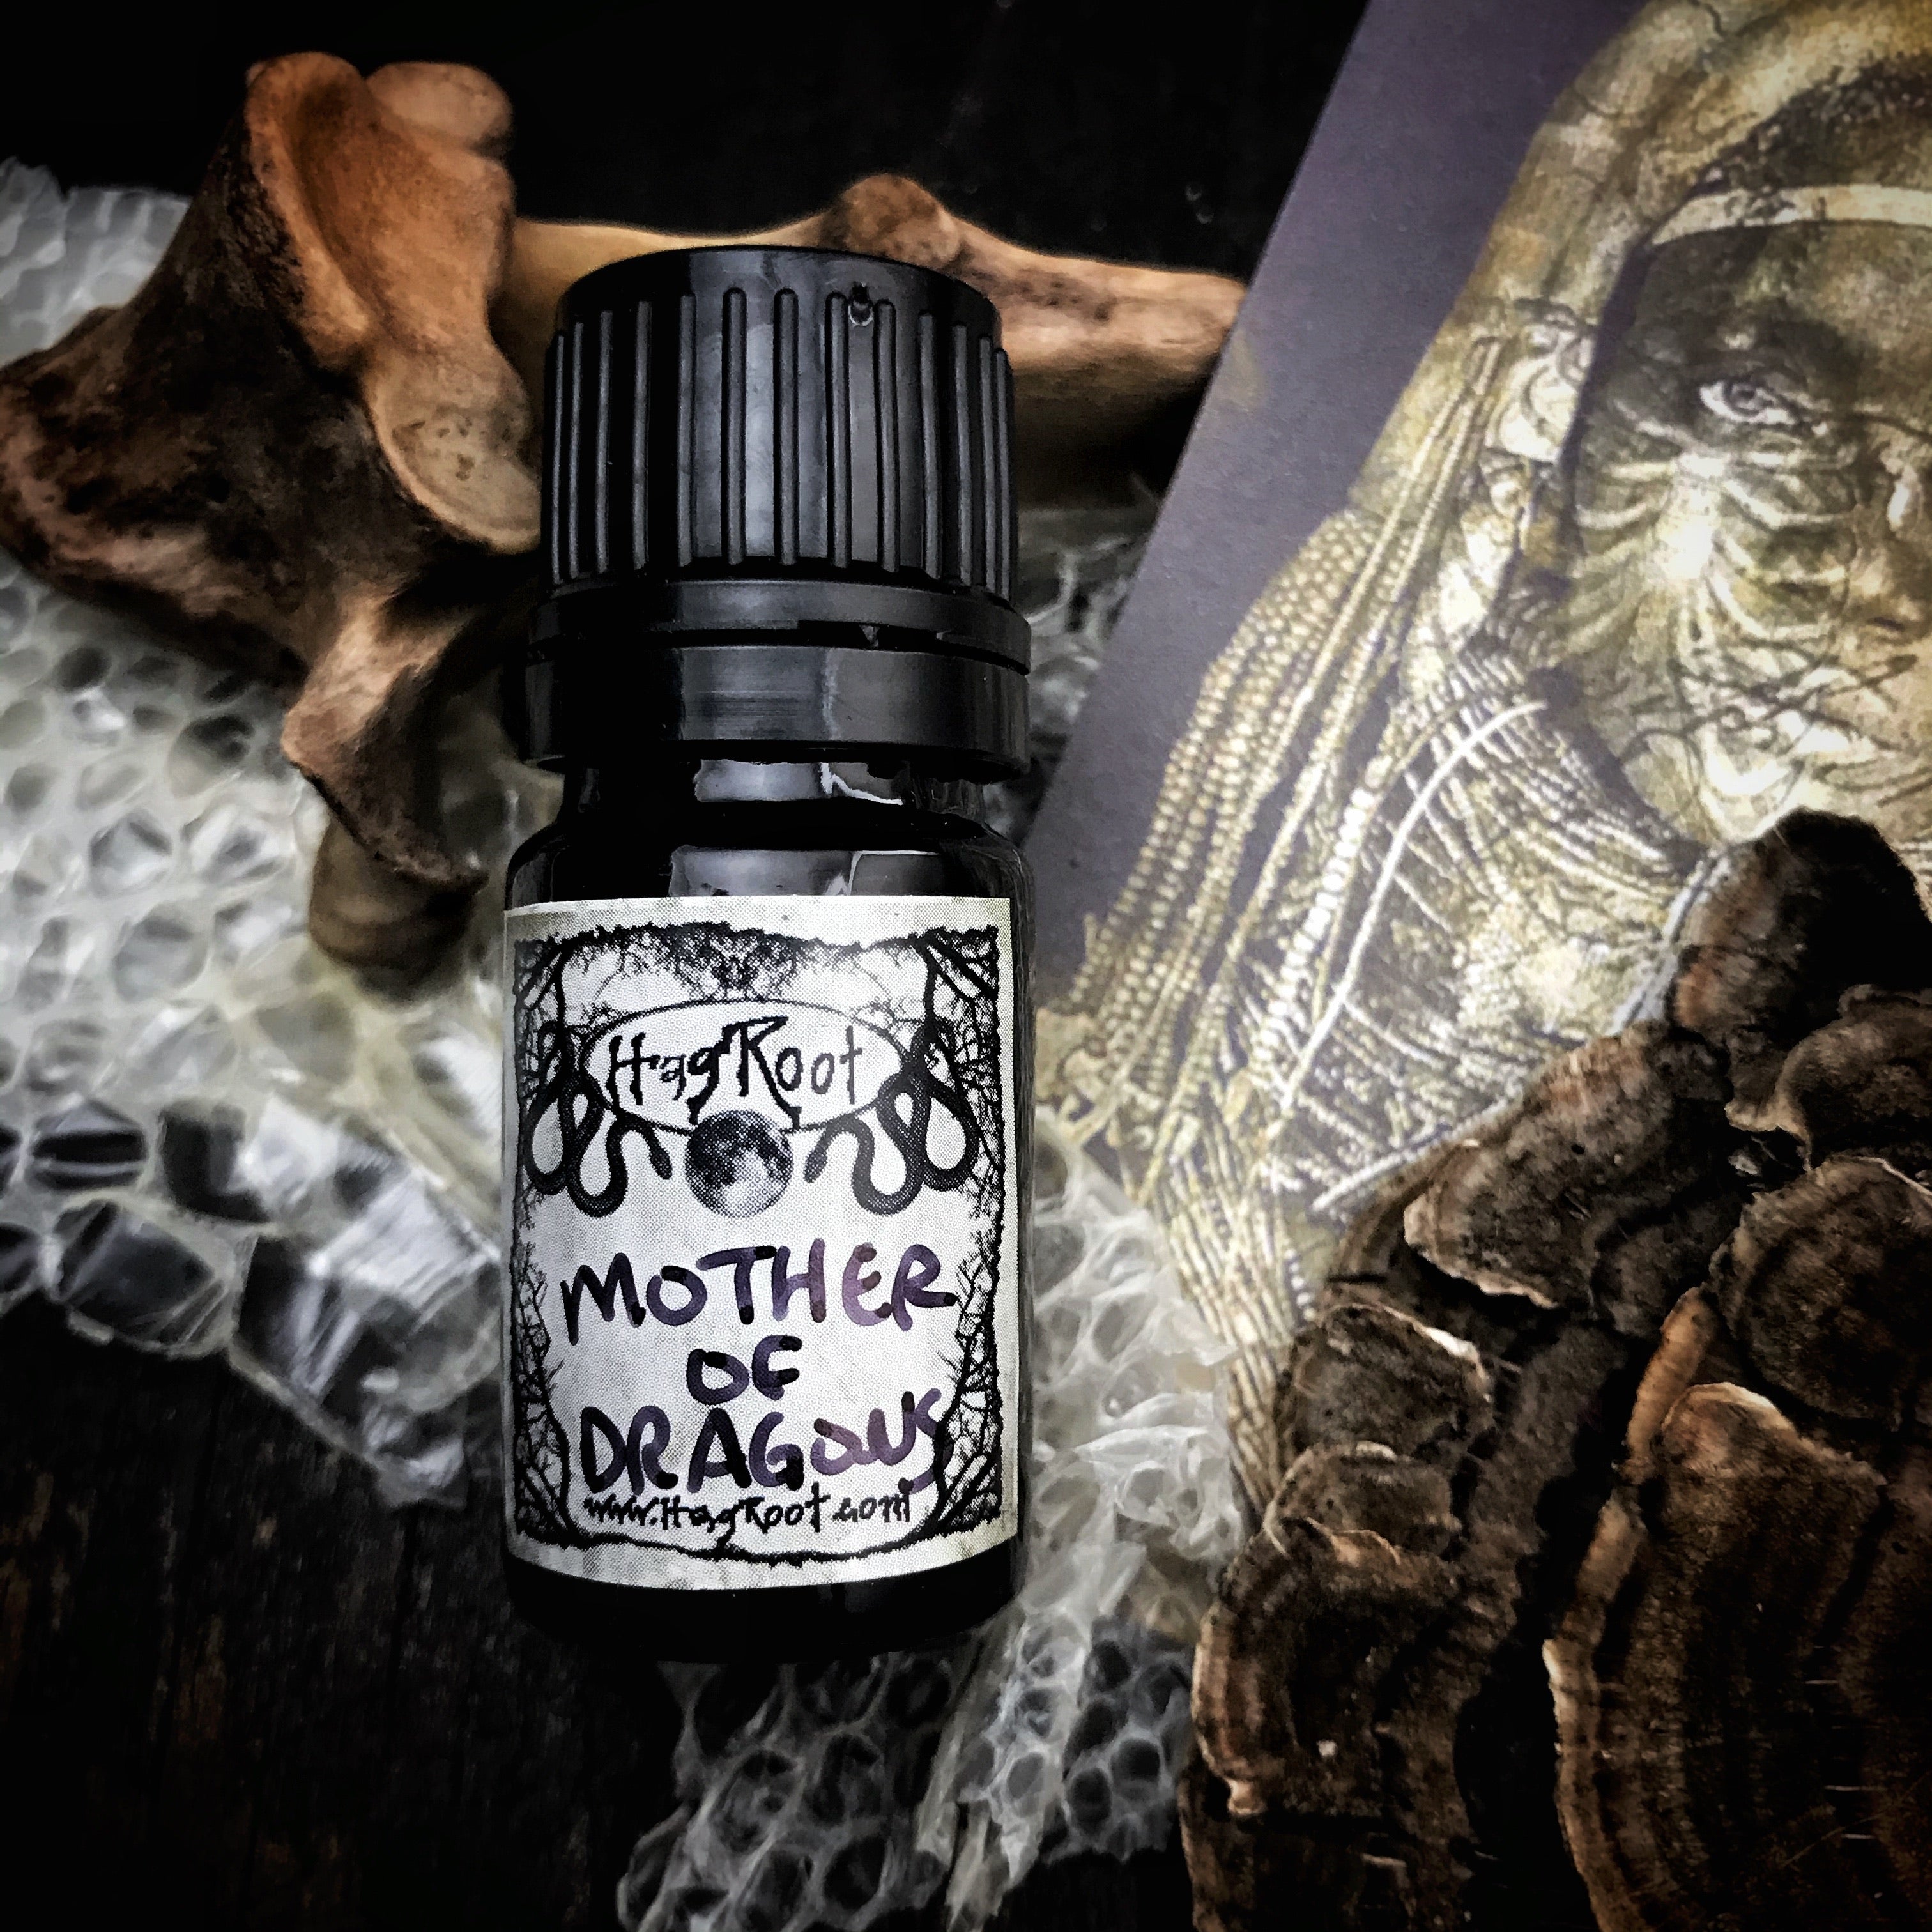 MOTHER OF DRAGONS-(Dragons Blood, Moss, Charred Birch, Smoked Marshmallow, Hawthorn Berry)-Perfume, Cologne, Anointing, Ritual Oil